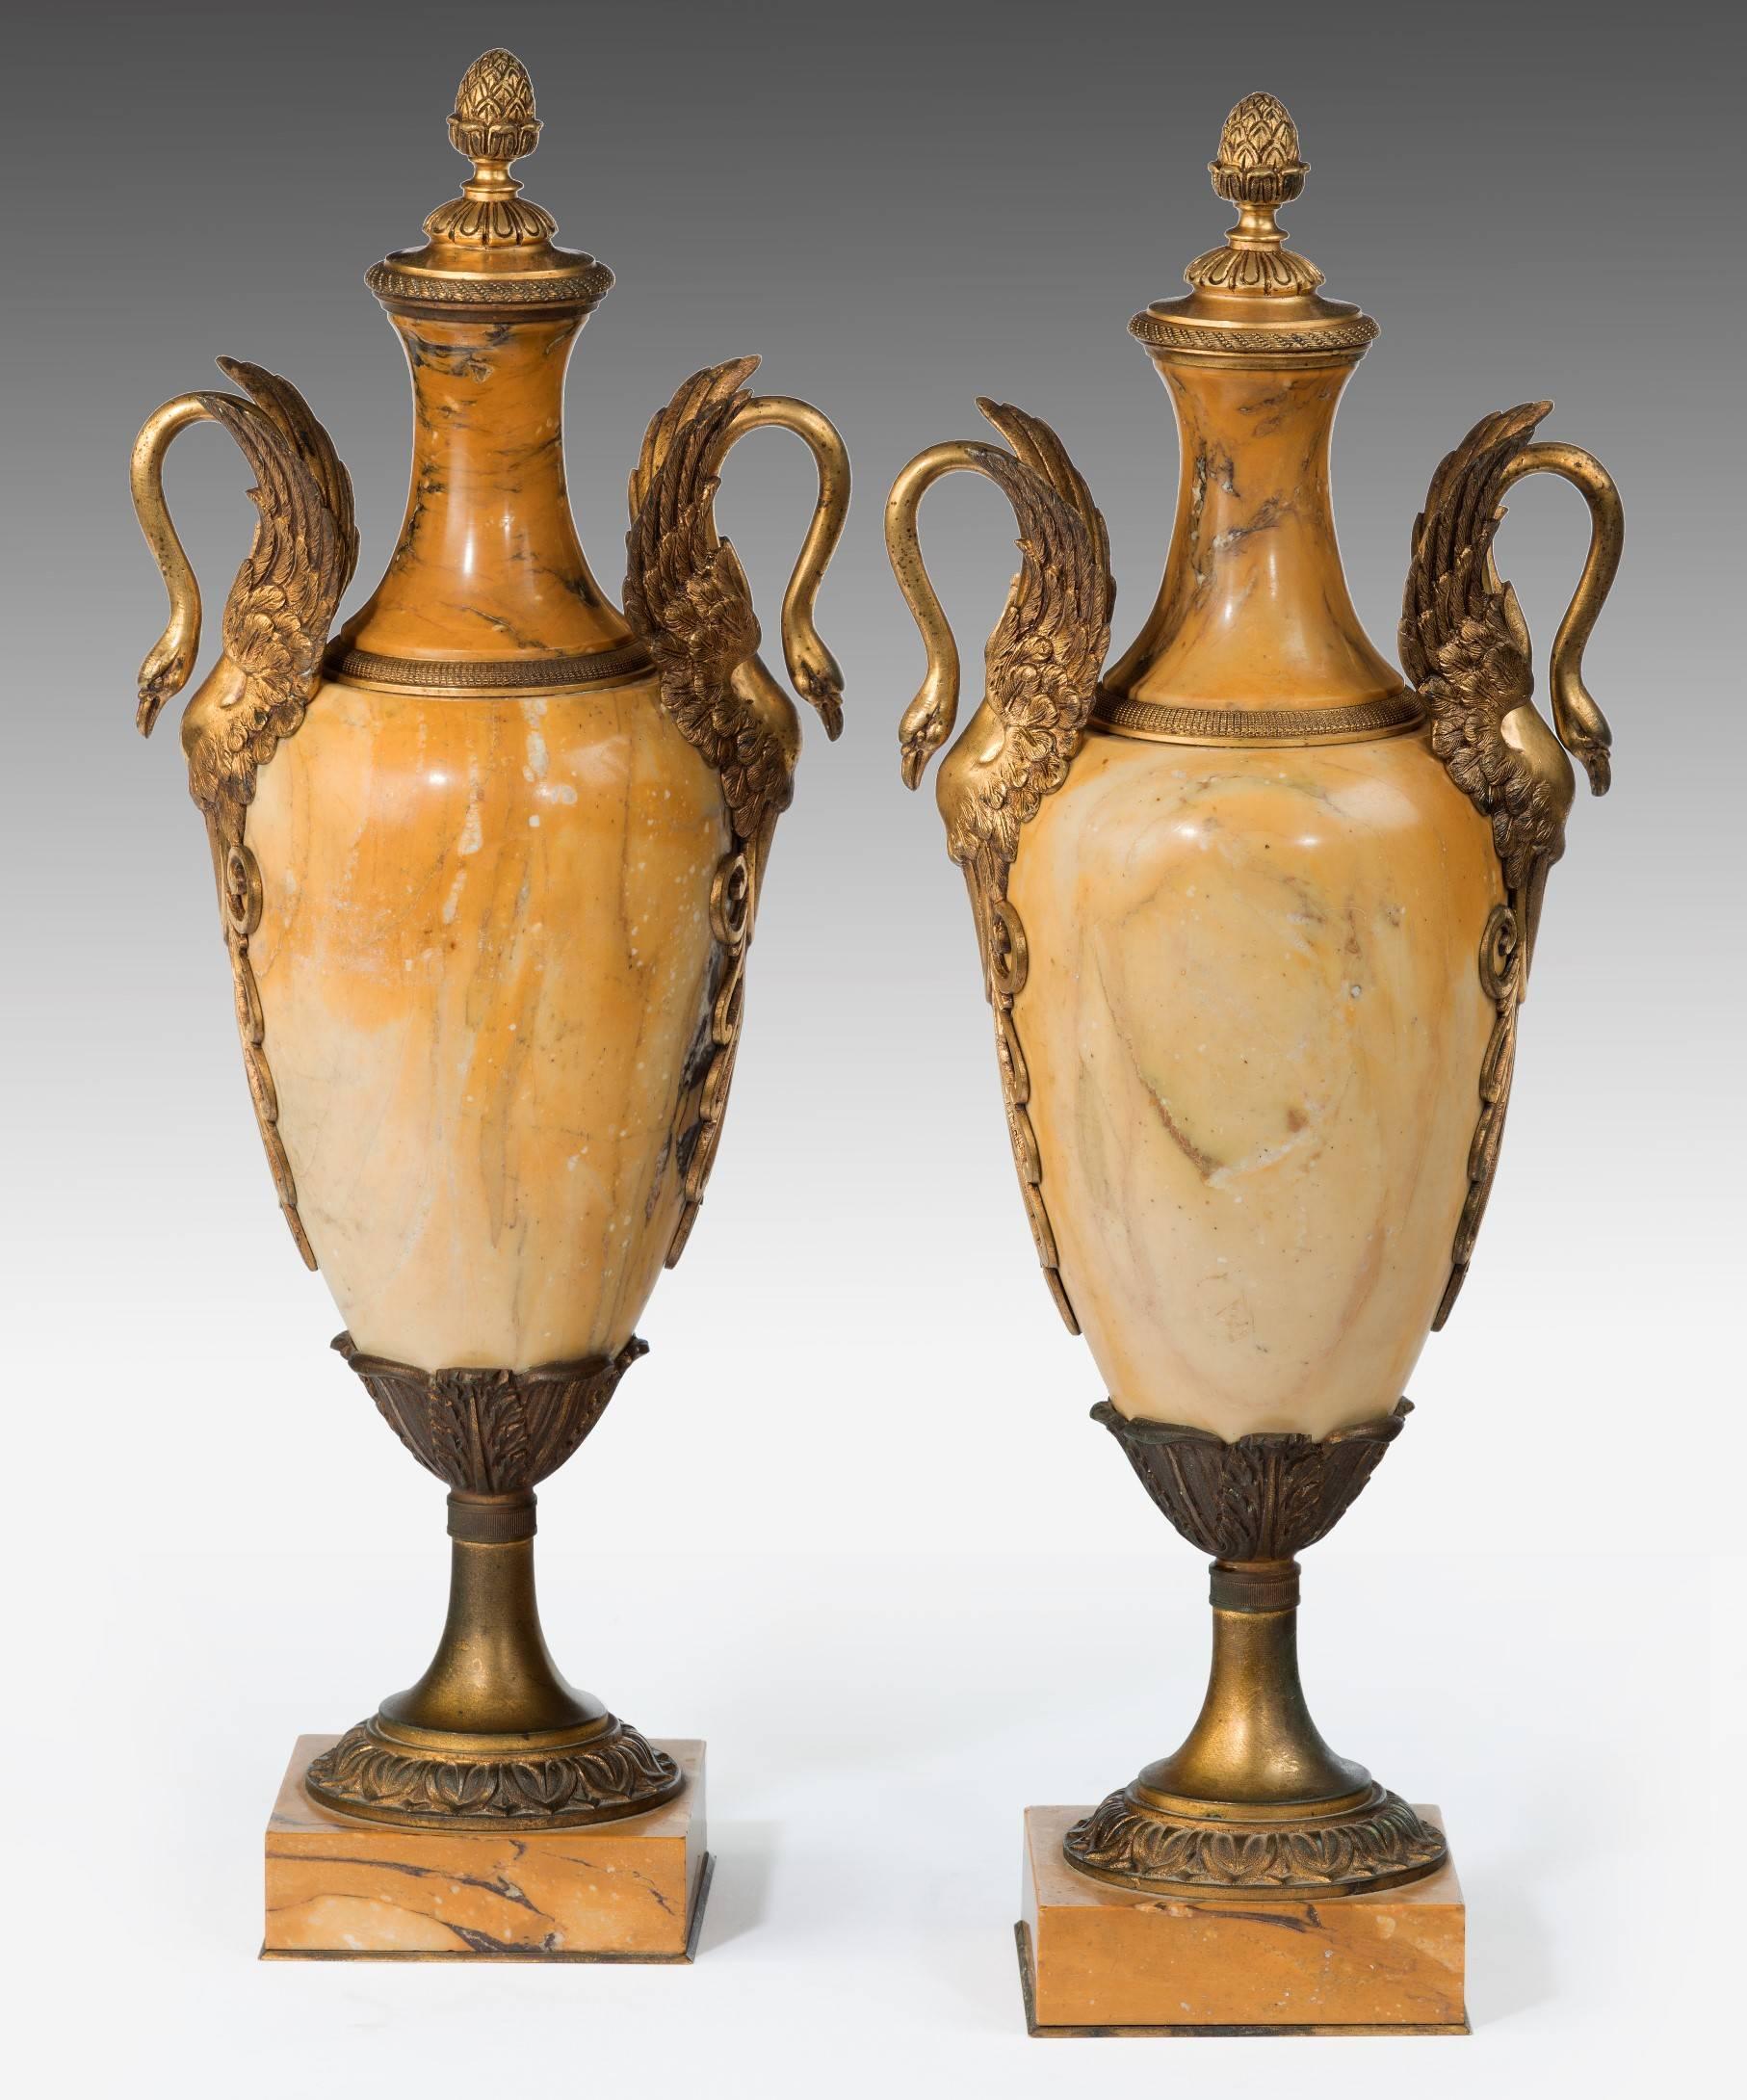 Victorian Pair of Marble and Ormolu Vases from the 19th Century For Sale